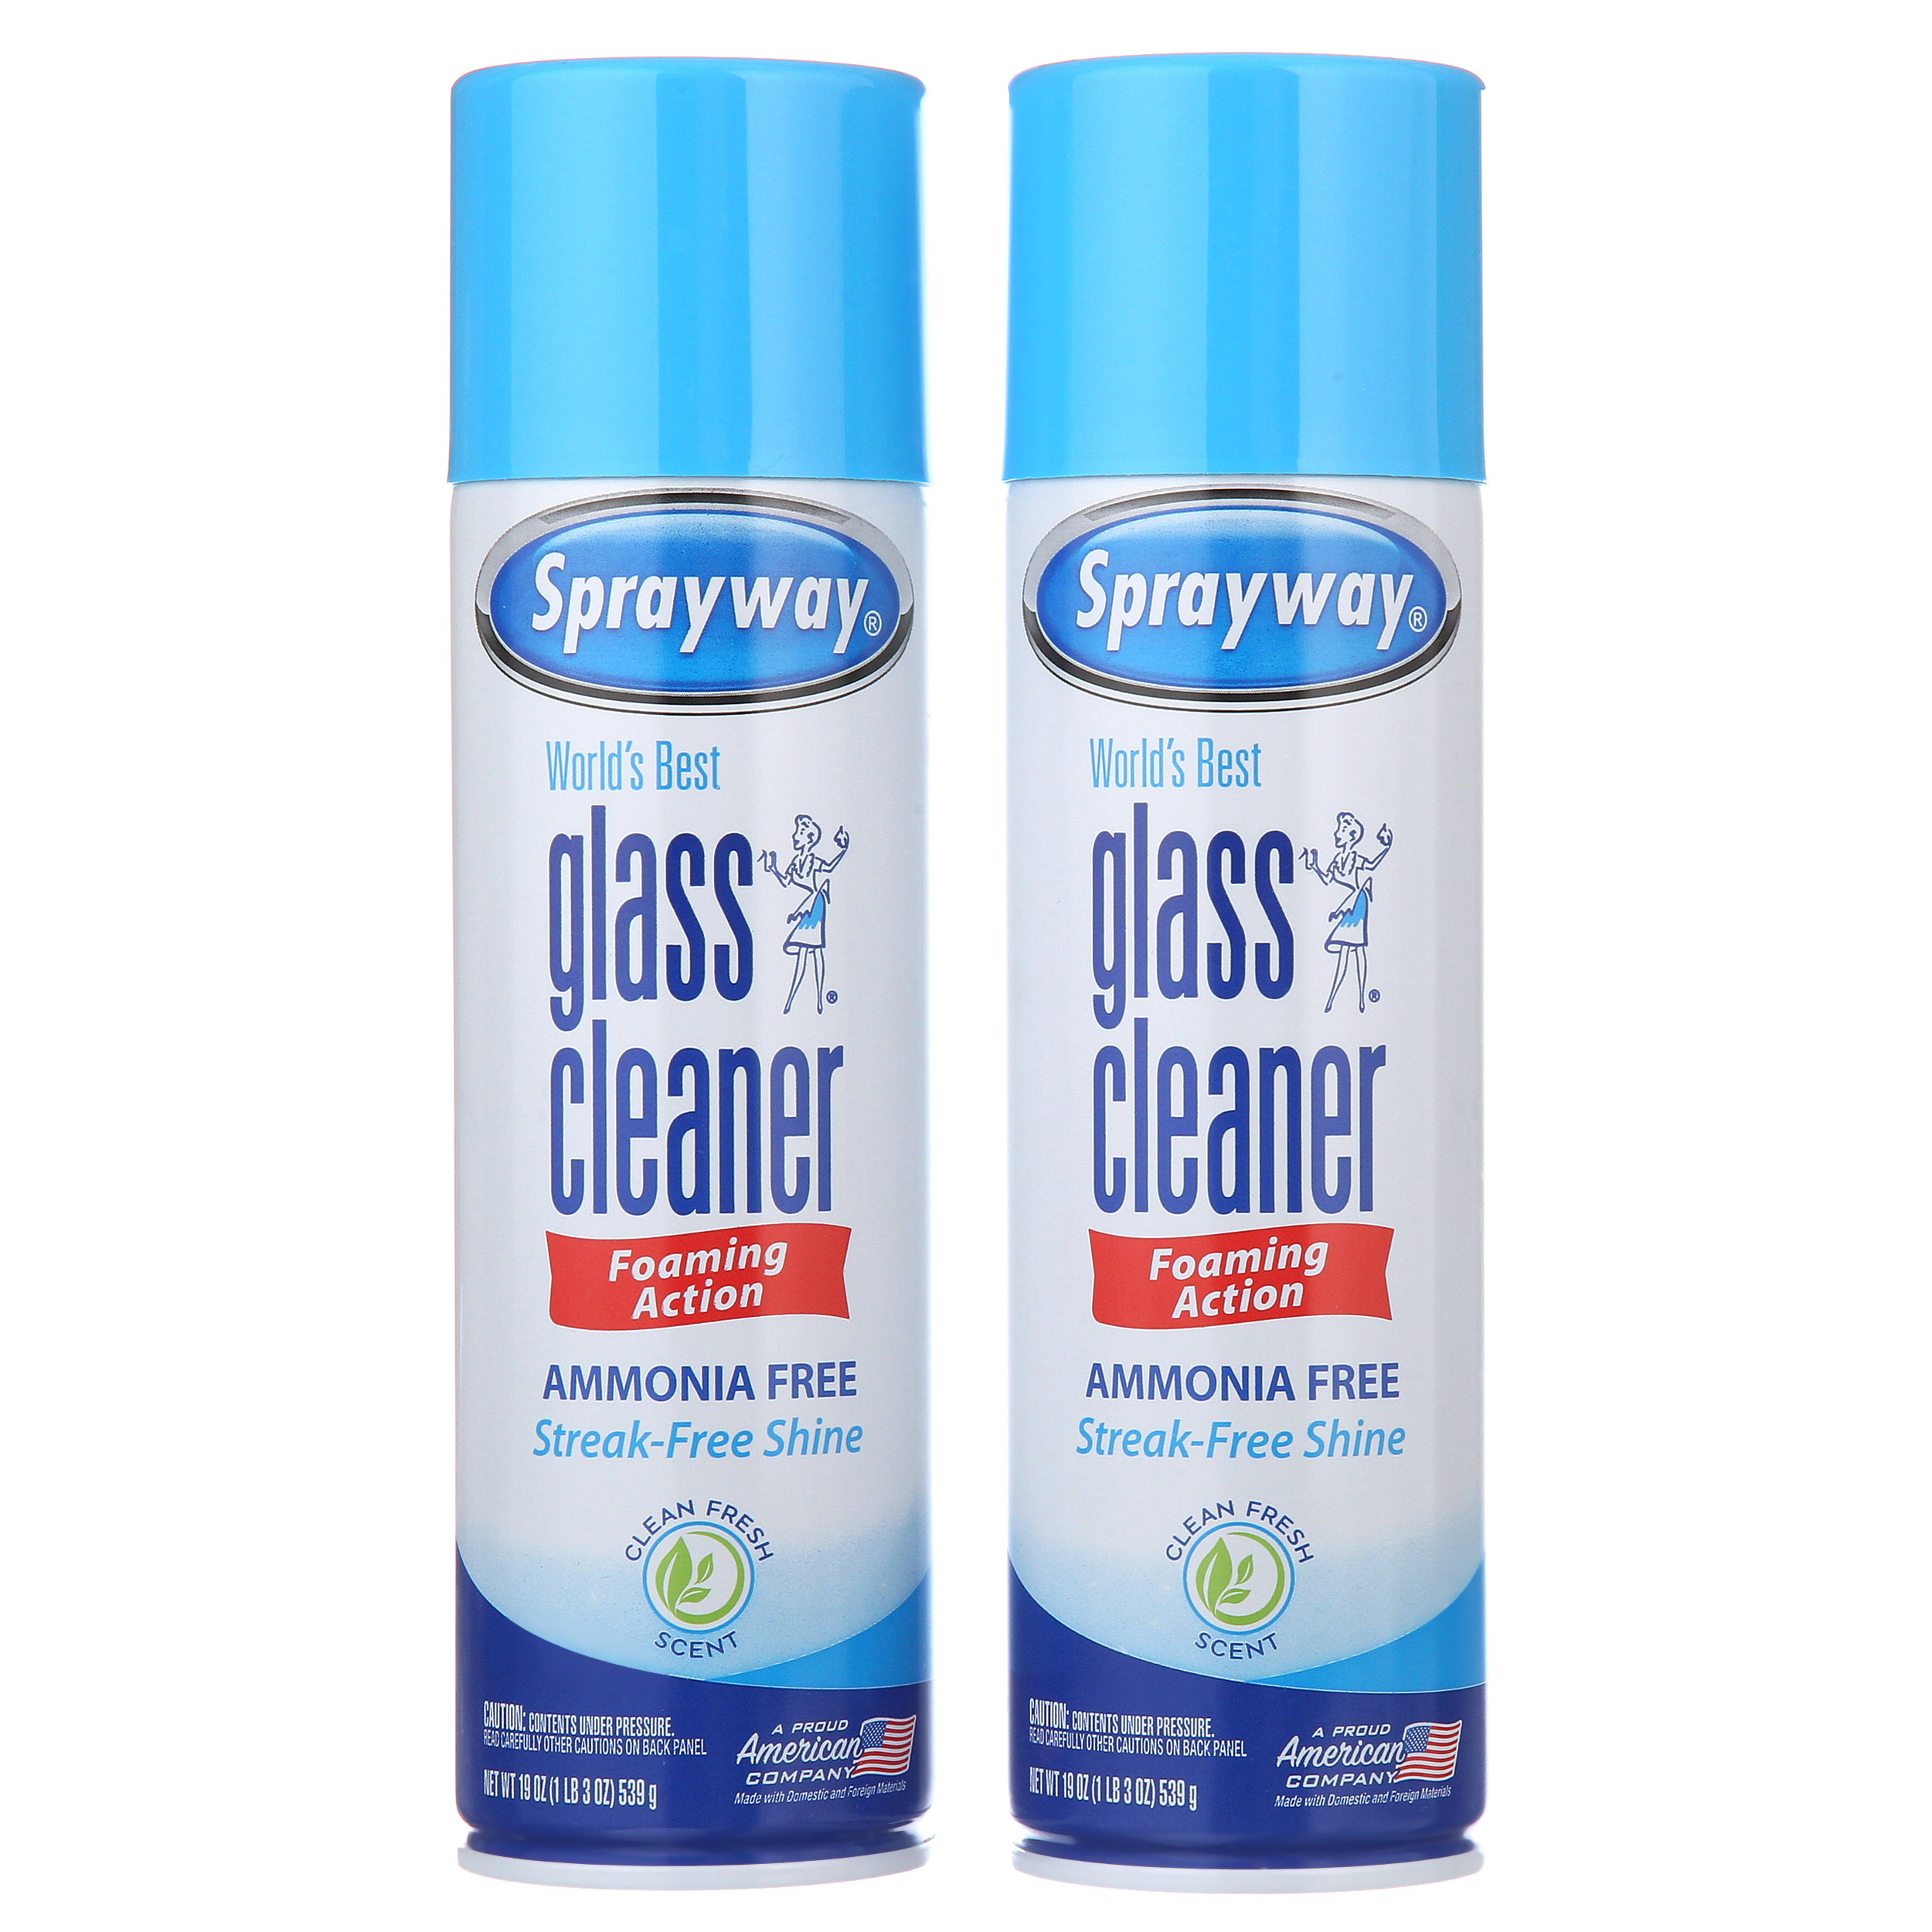 Sprayway, the world&#x27;s best glass cleaner which is ammonia-free, leaves a streak-free shine, and has a foaming action